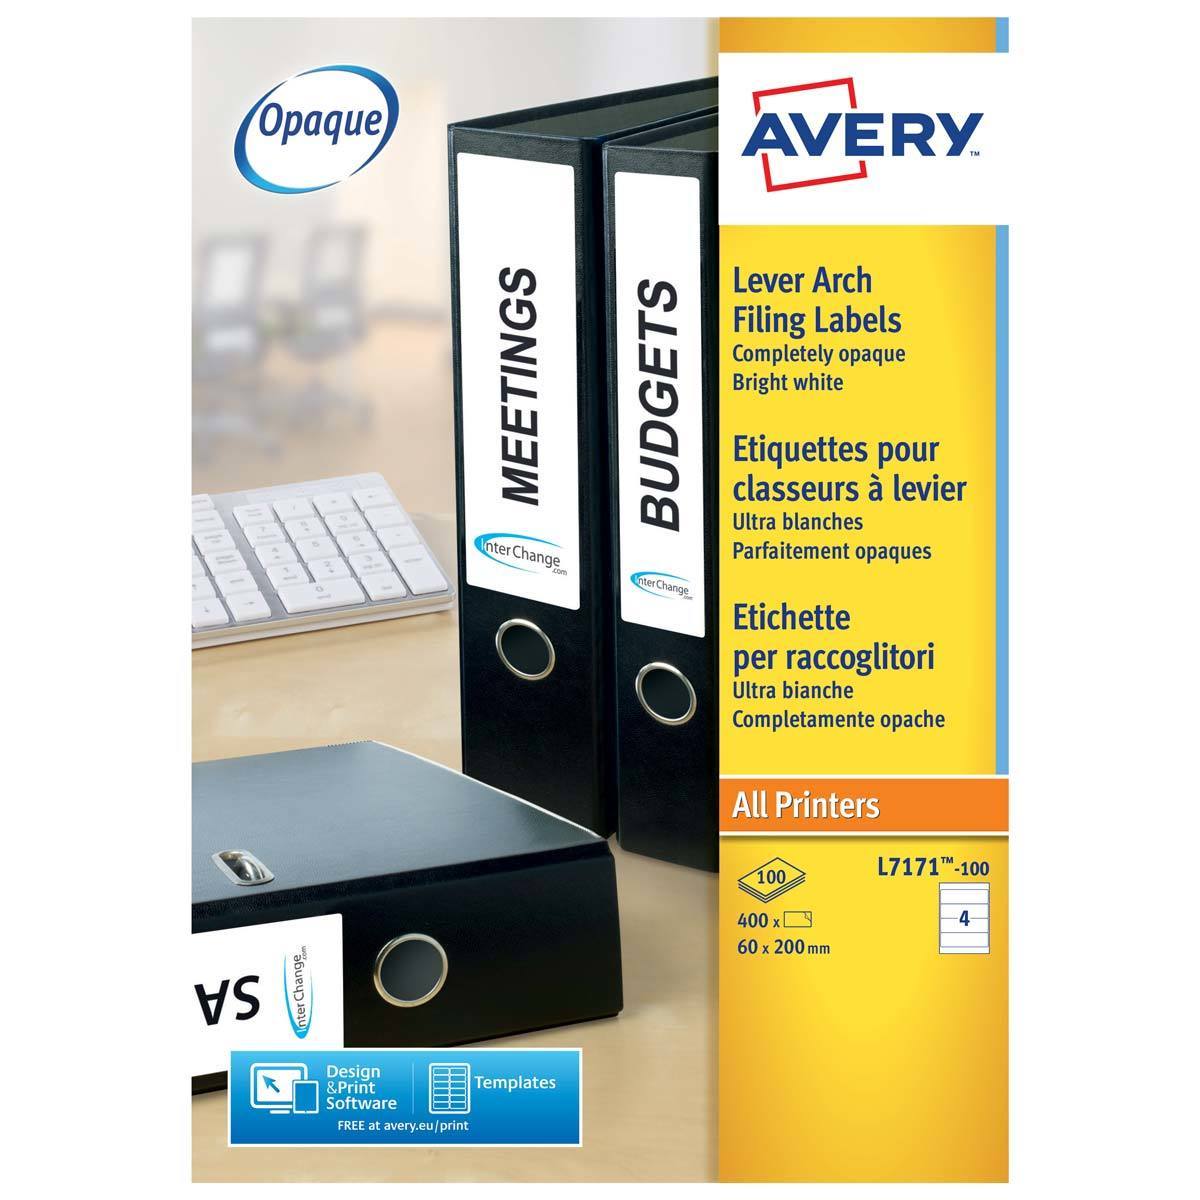 Avery Filing Labels 60.0 x 200.0mm, L7171-100, Pack of 400